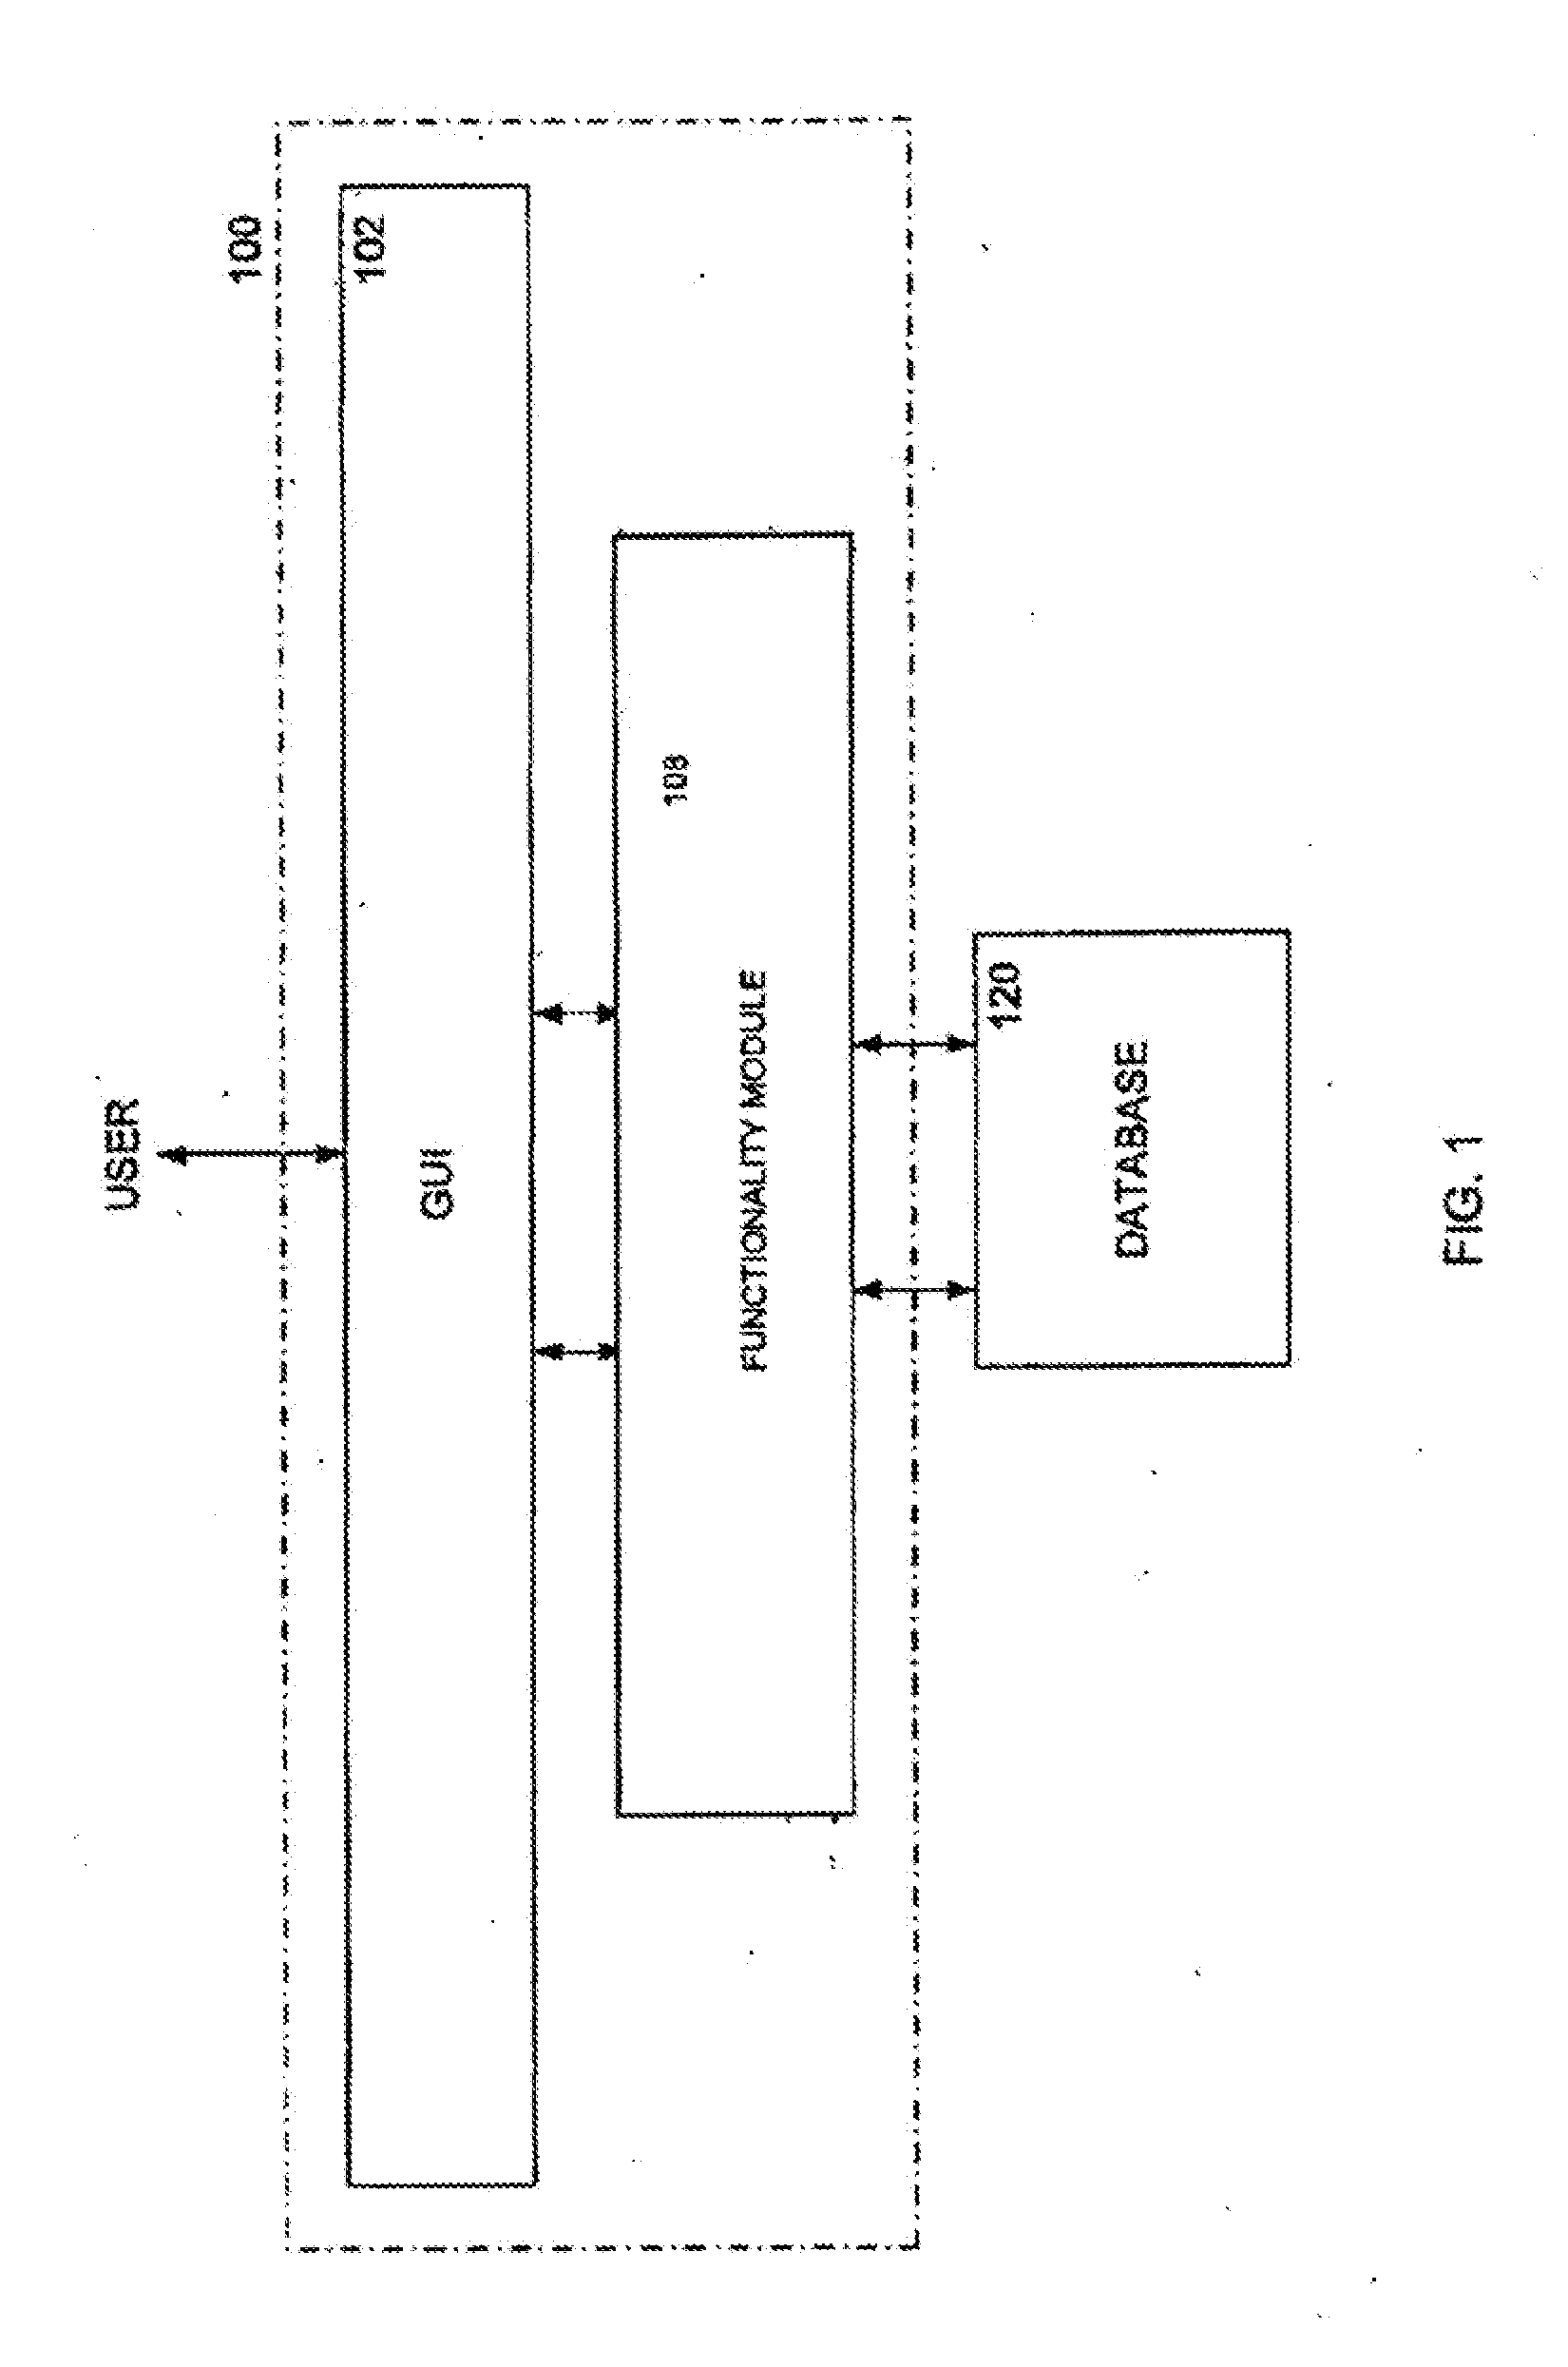 System and method of providing patients incentives for healthy behaviors